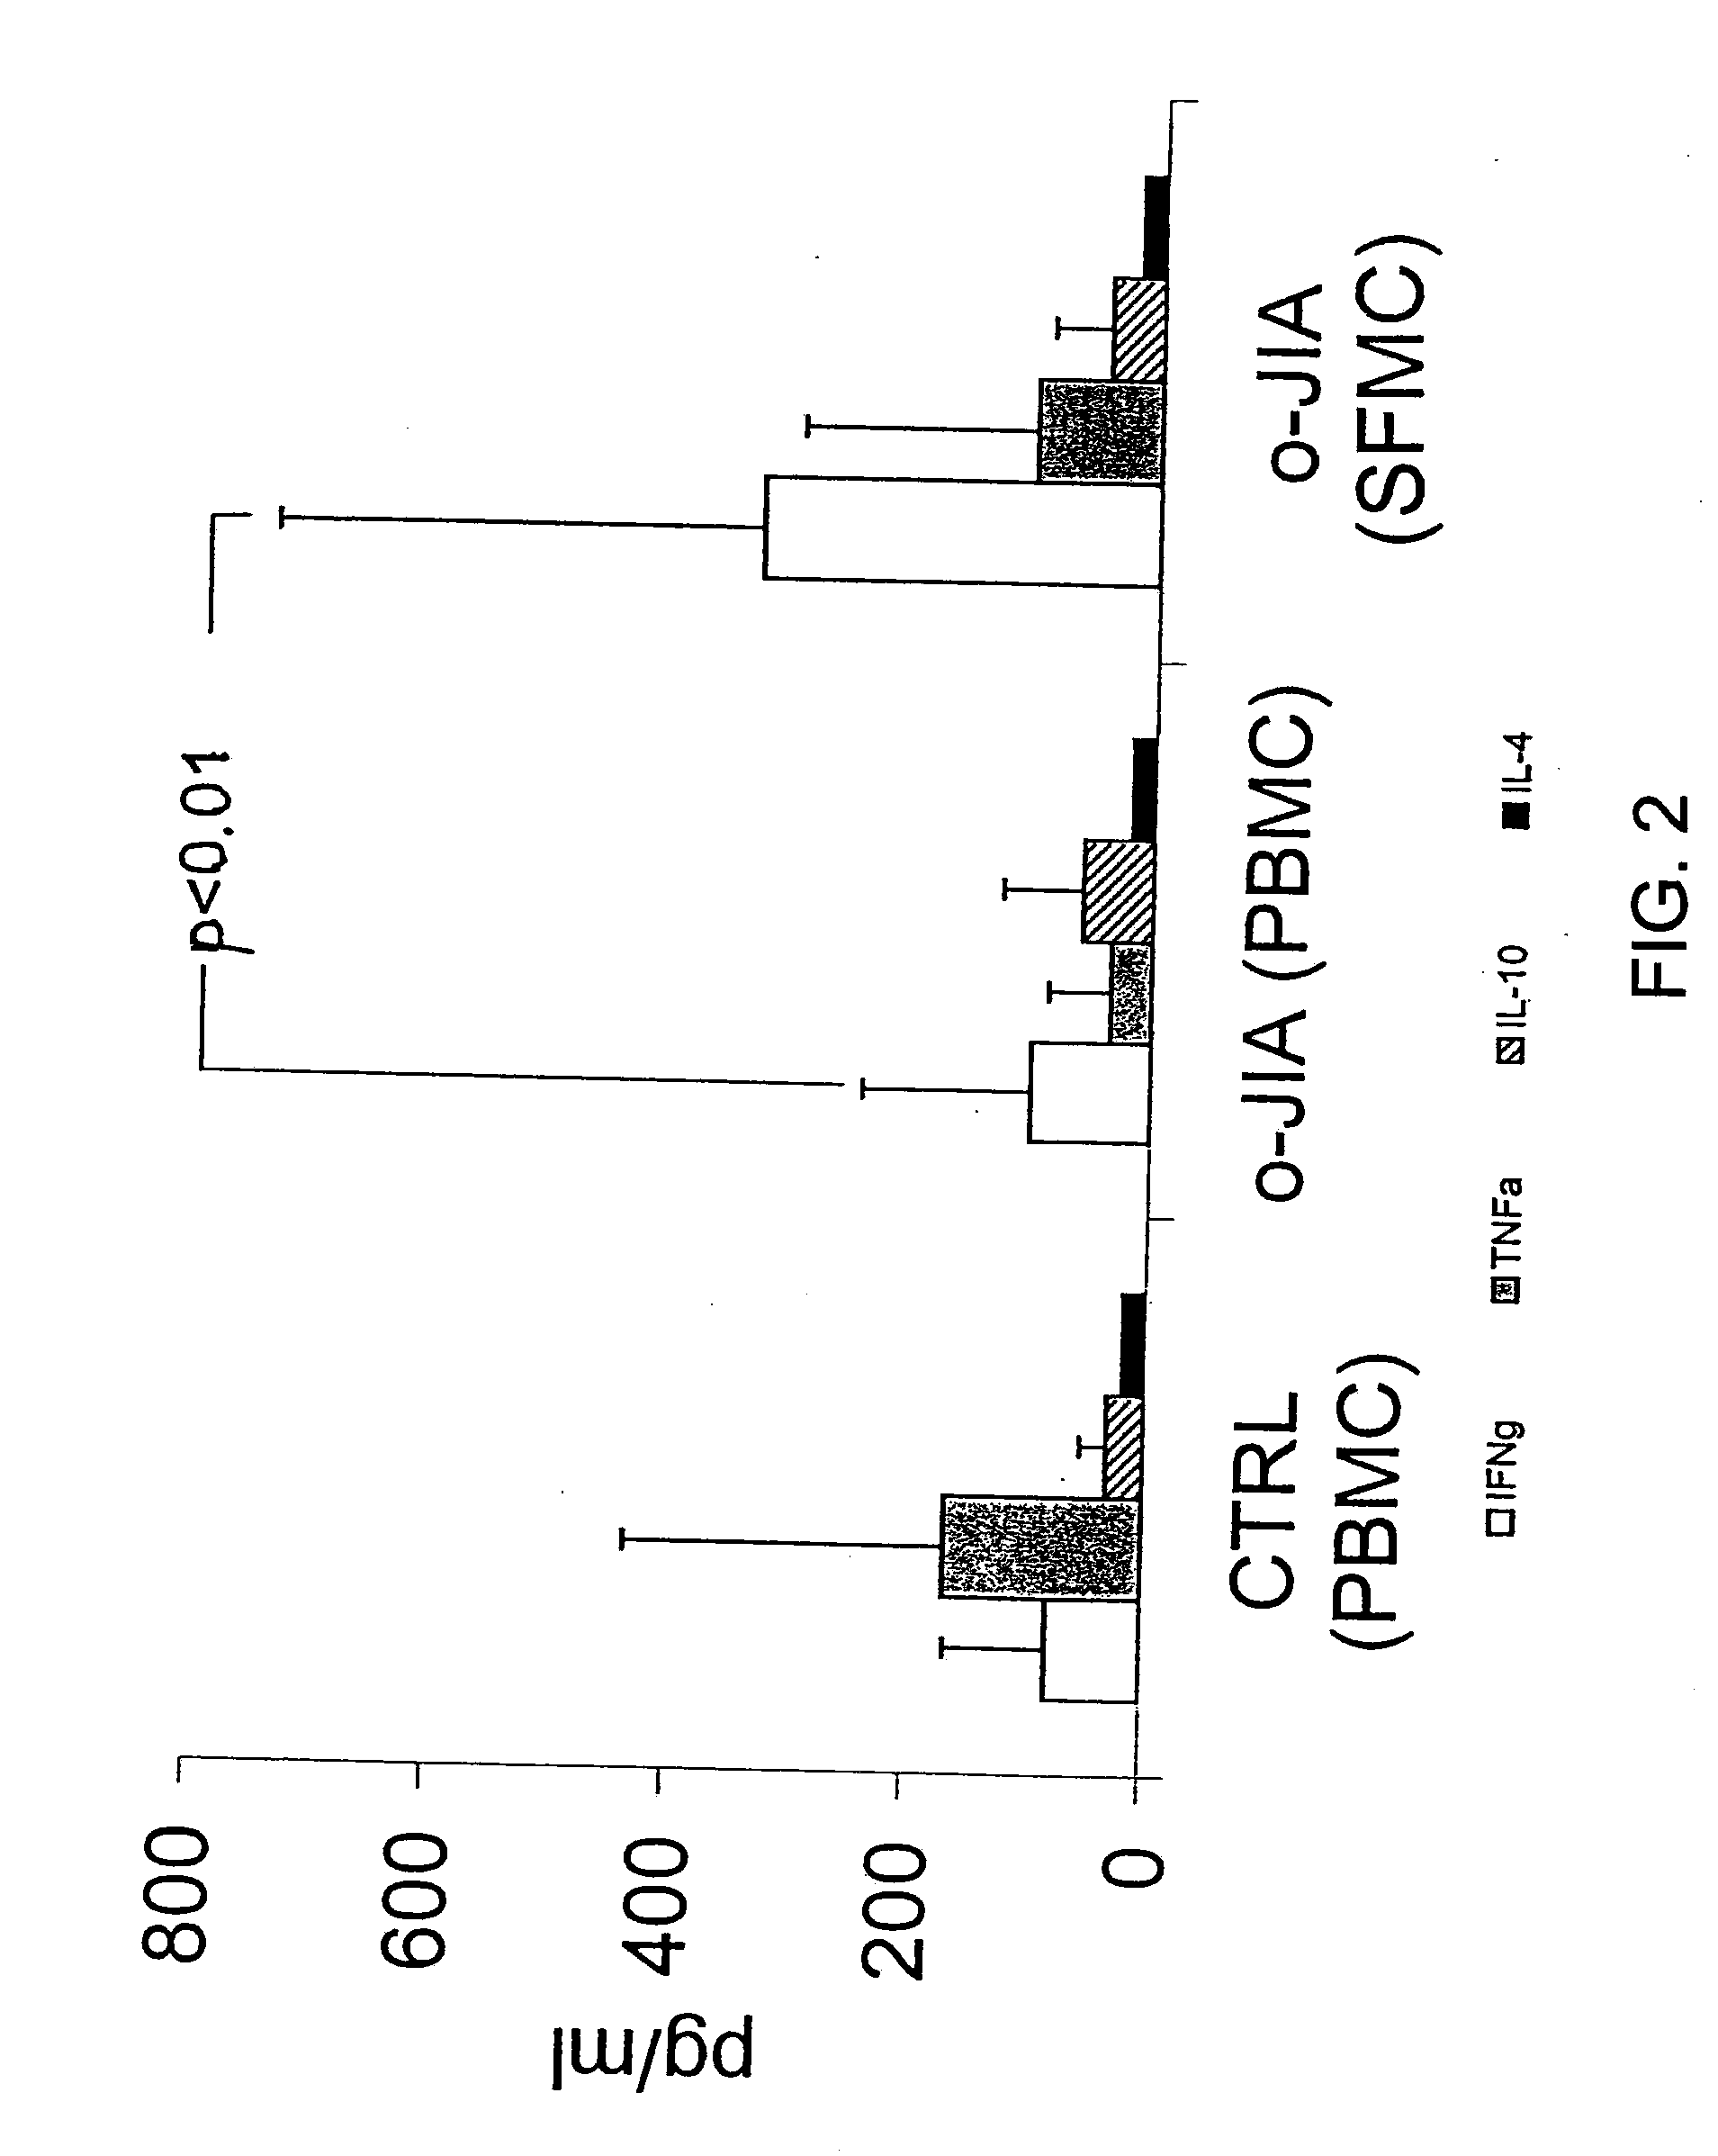 Immunomodulatory Peptides Derived from Heat Shock Proteins and Uses Thereof